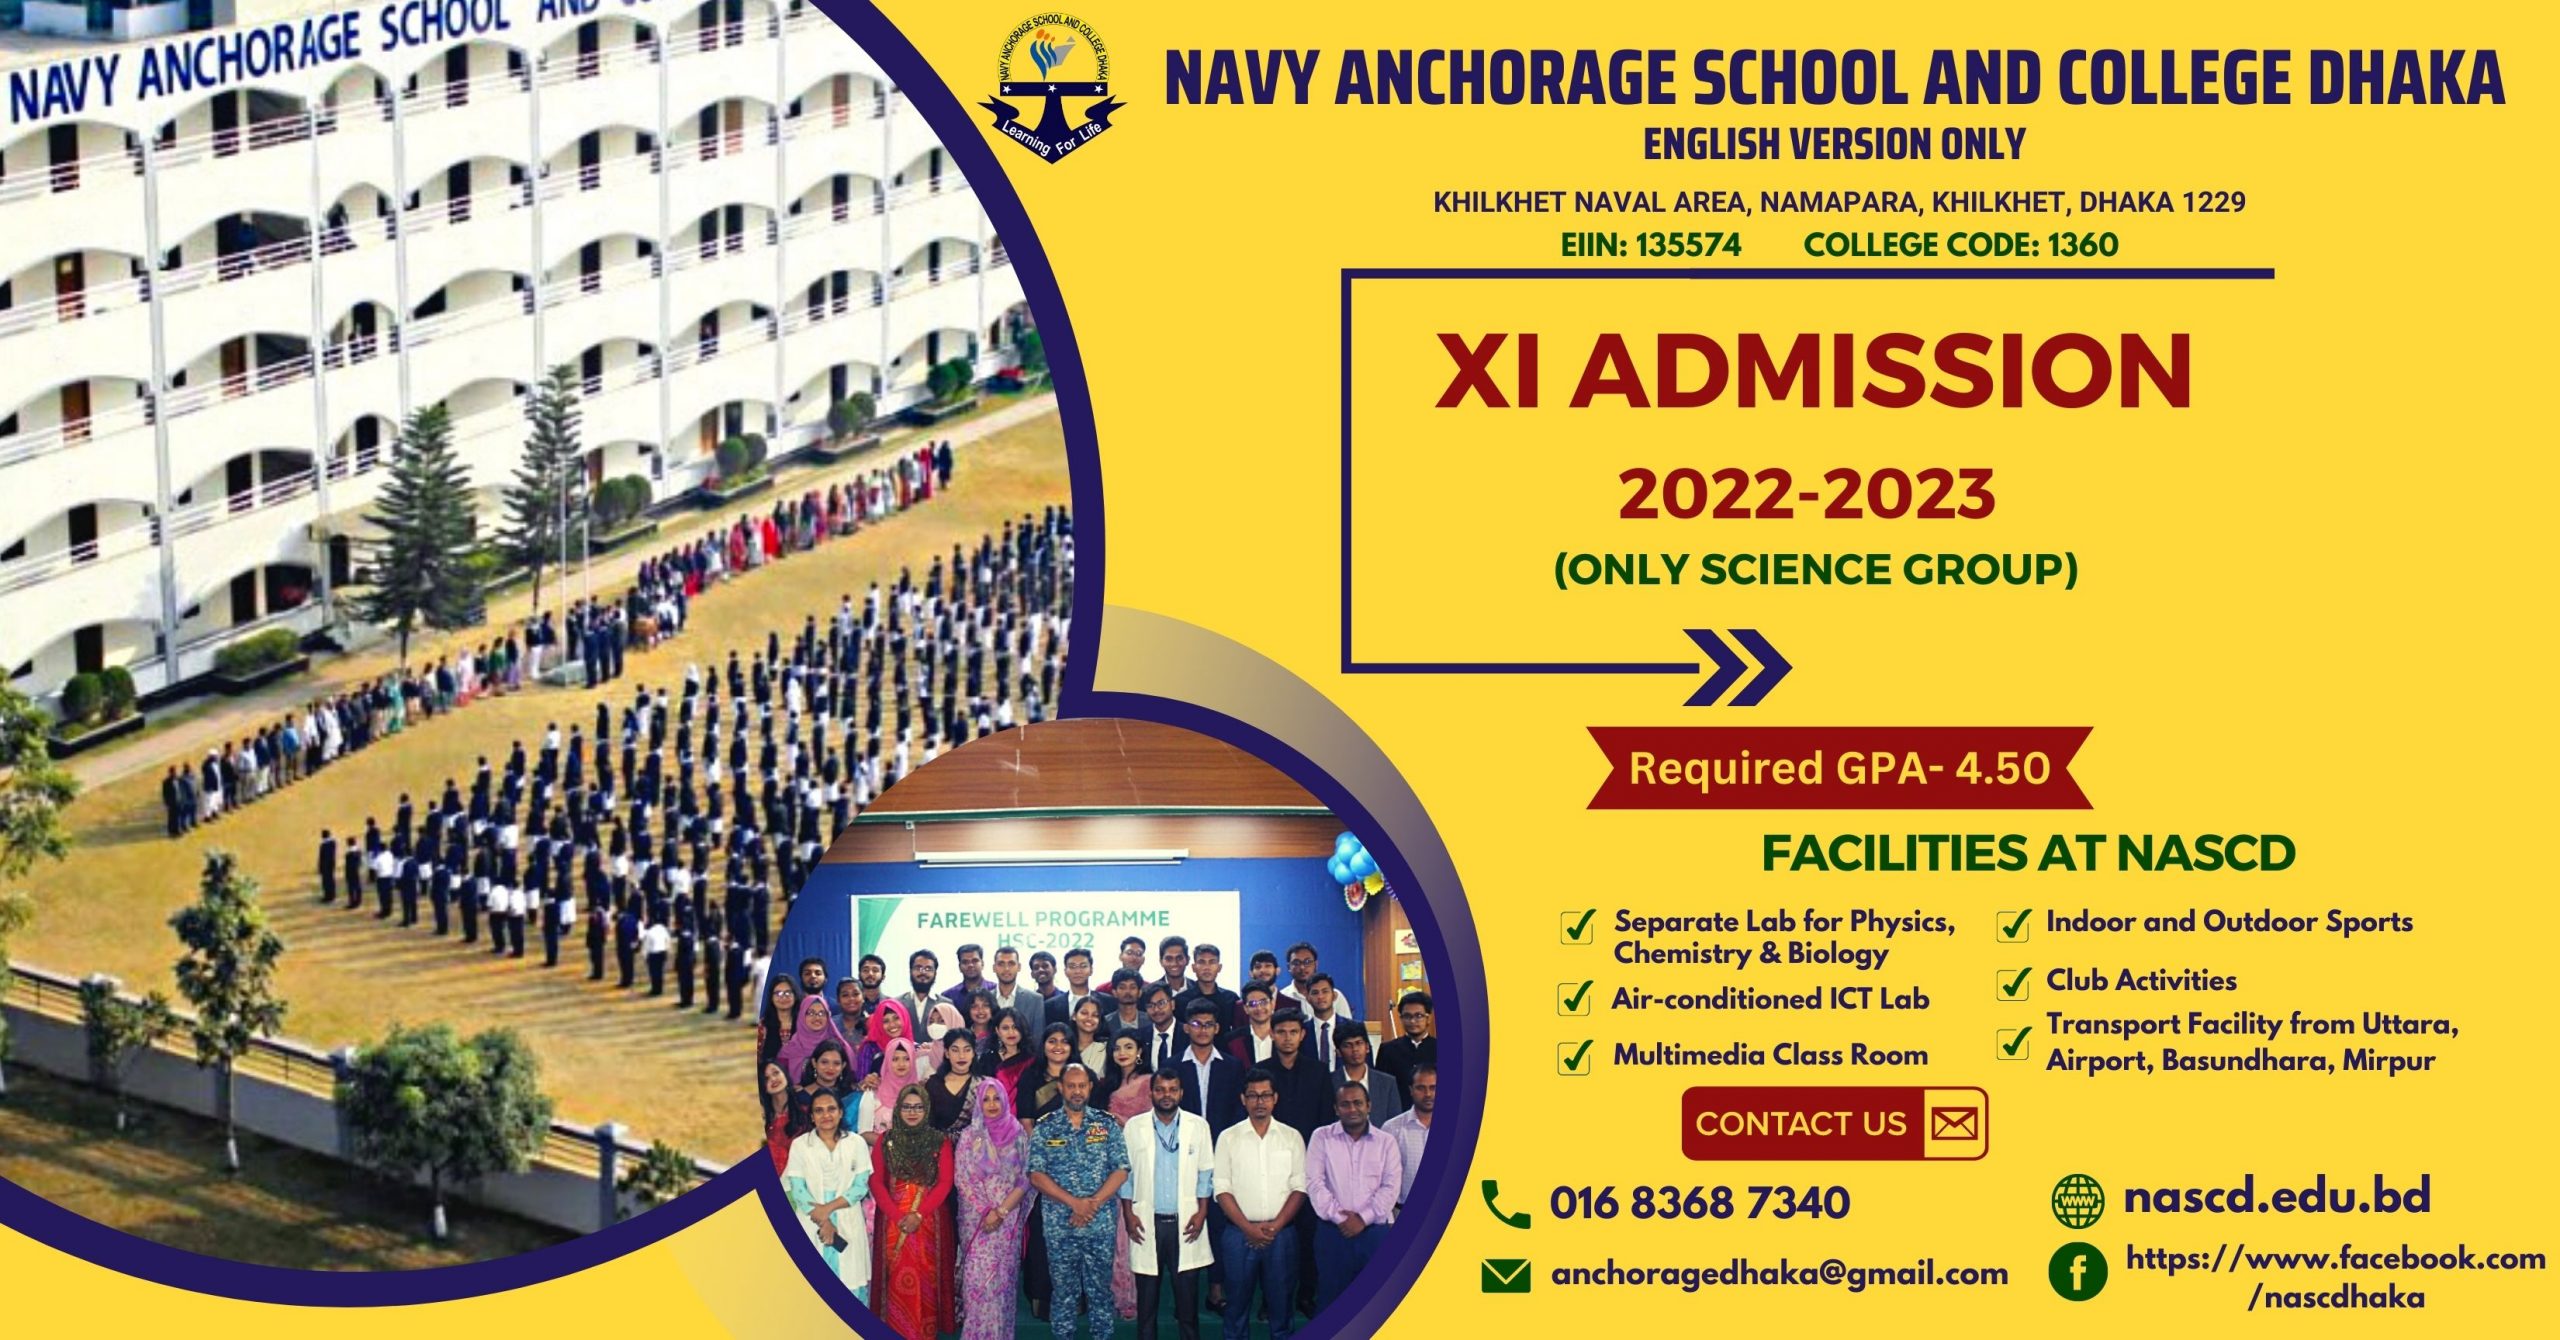 ADMISSION OPEN FOR CLASS XI 2022-2023